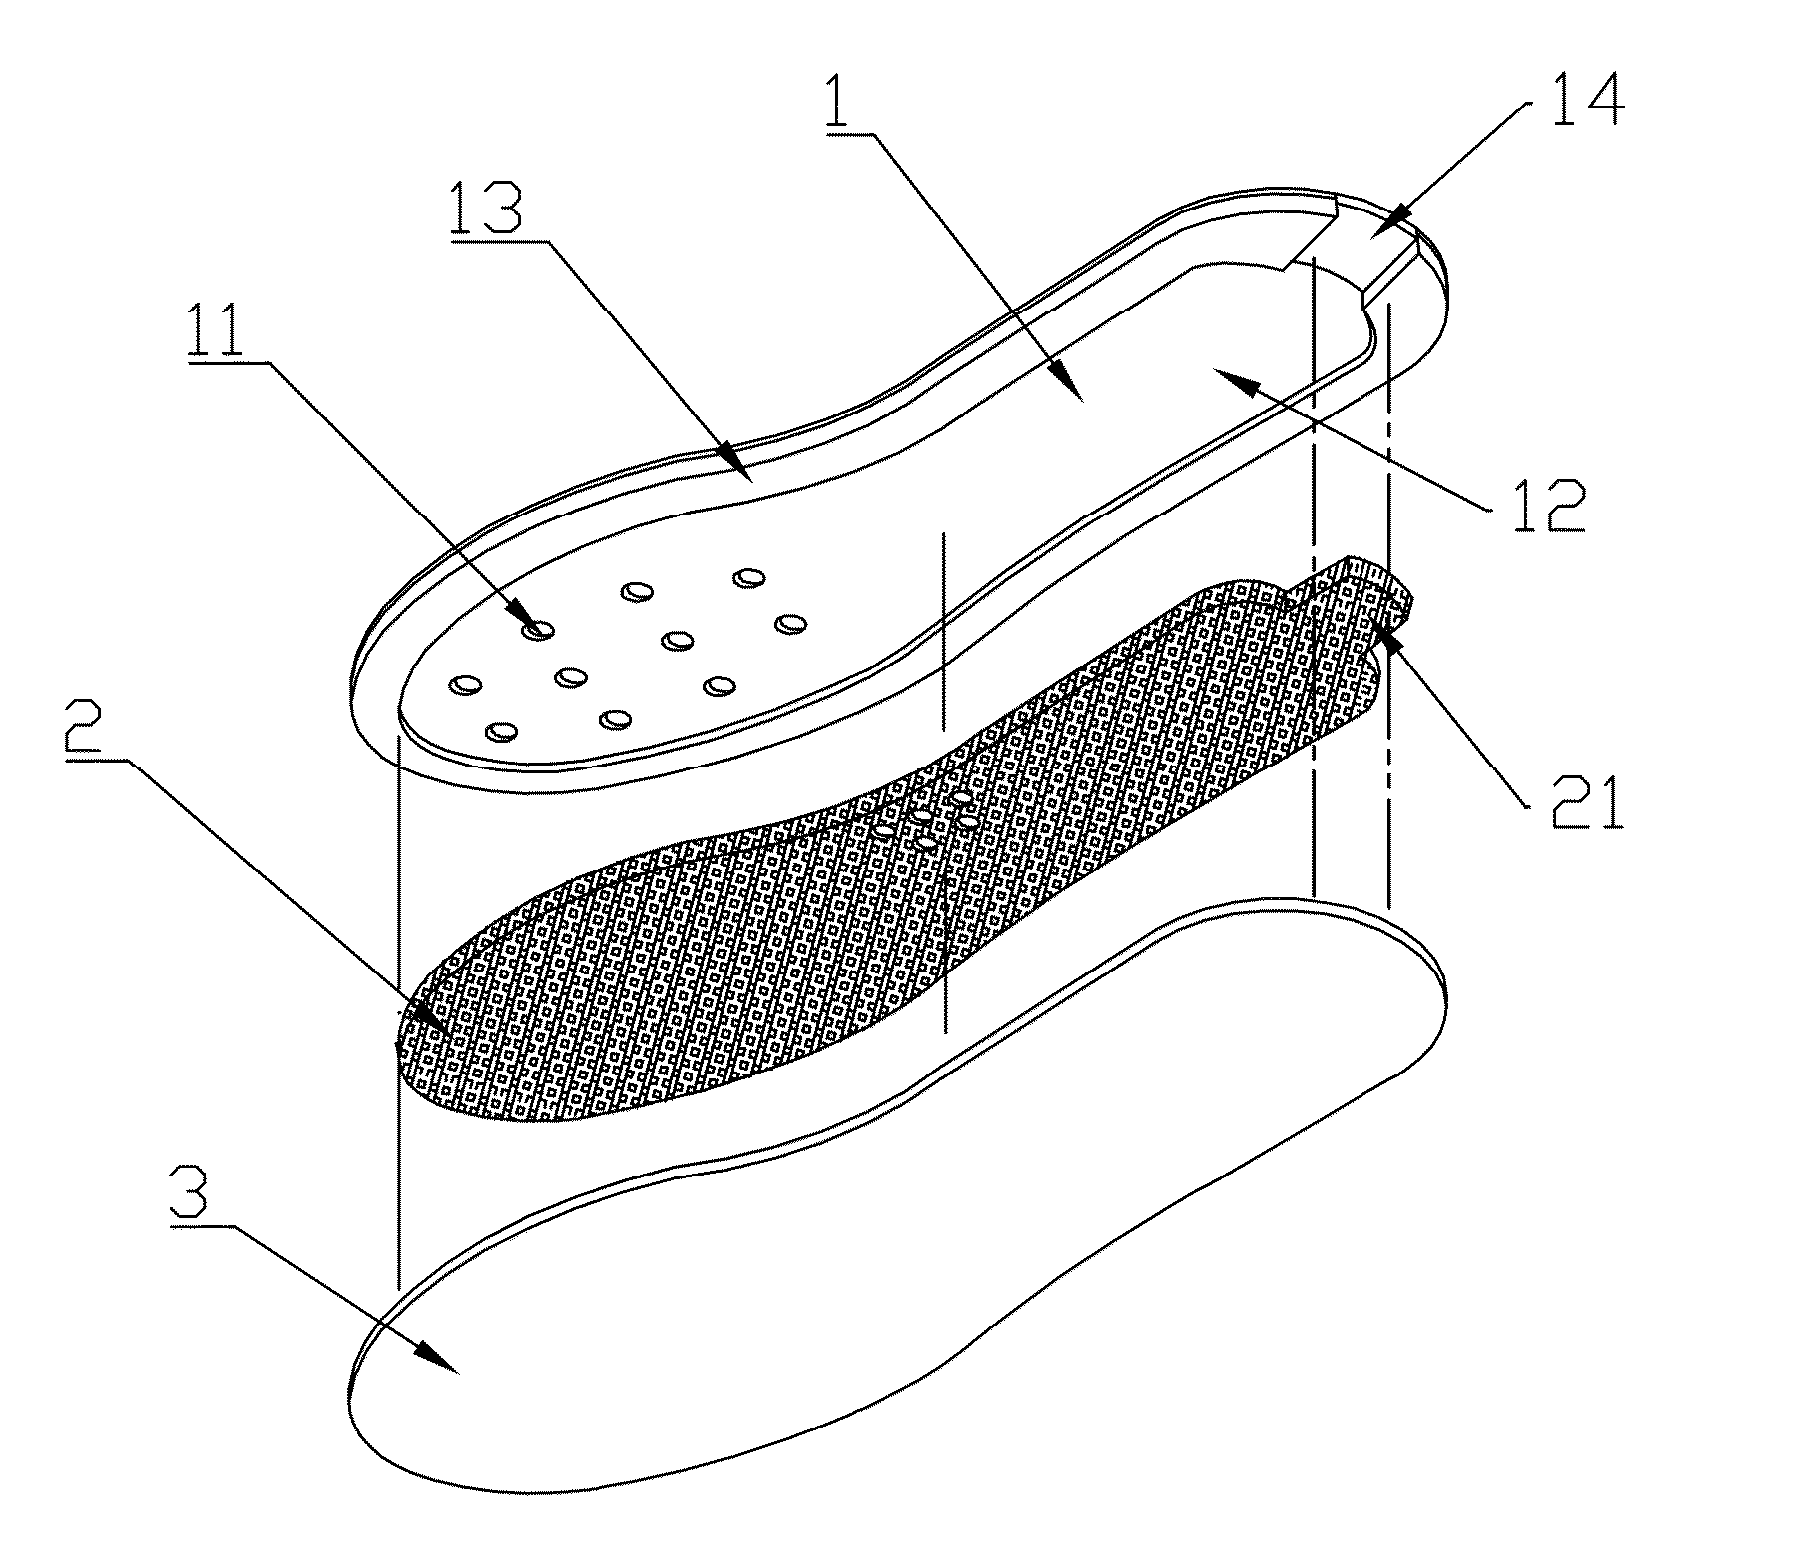 Ventilating insole structure